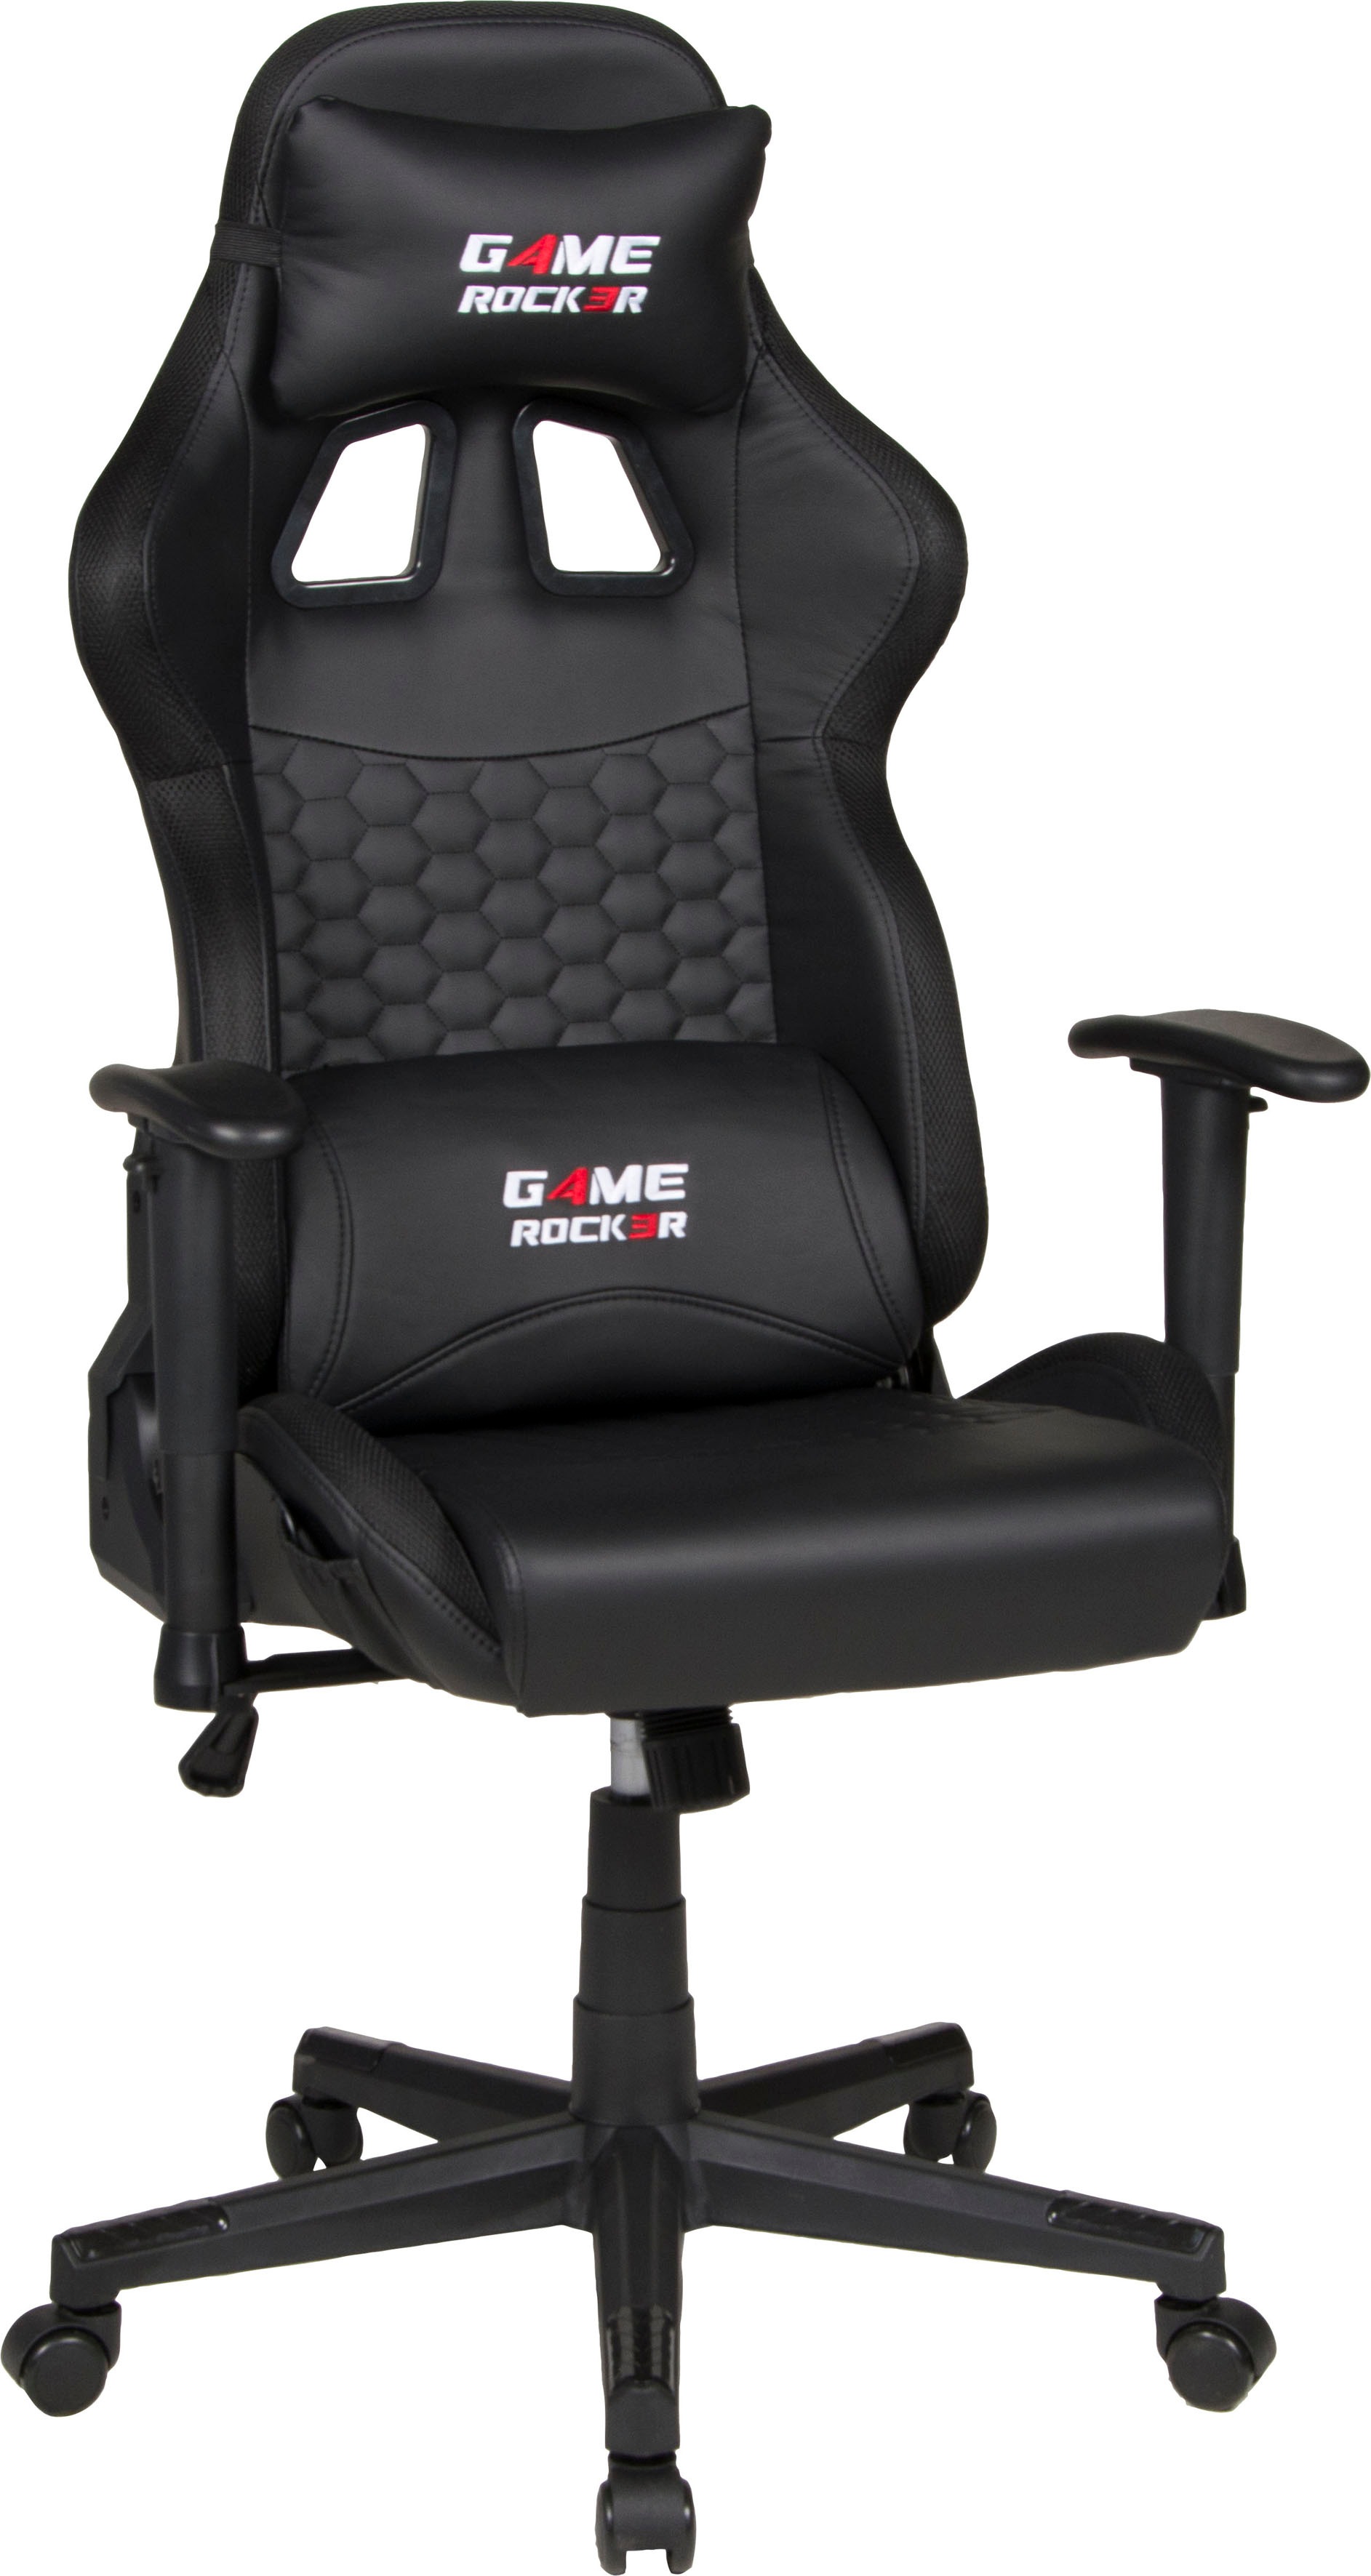 Duo Collection Chefsessel "Game-Rocker G-10 LED", Kunstleder-Netzstoff, Gaming Chair mit LED Wechselbeleuchtung